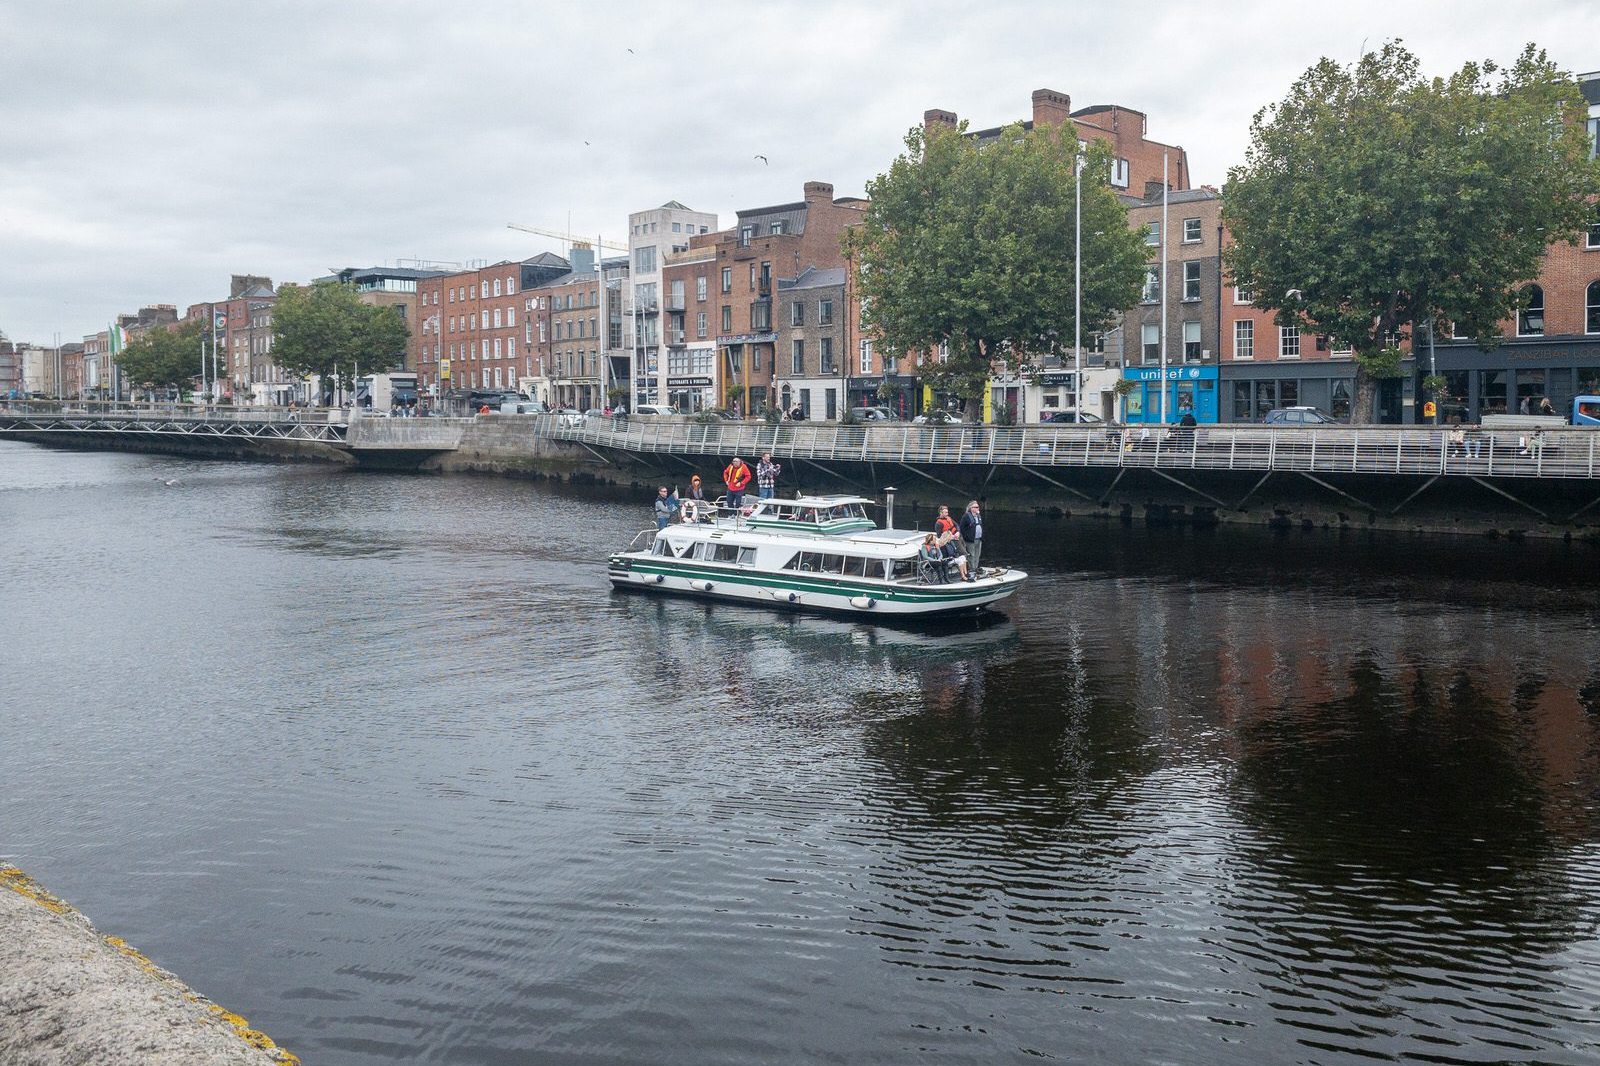 TWO BOATS AND A BARGE [SAILING DOWN THE RIVER LIFFEY] 006